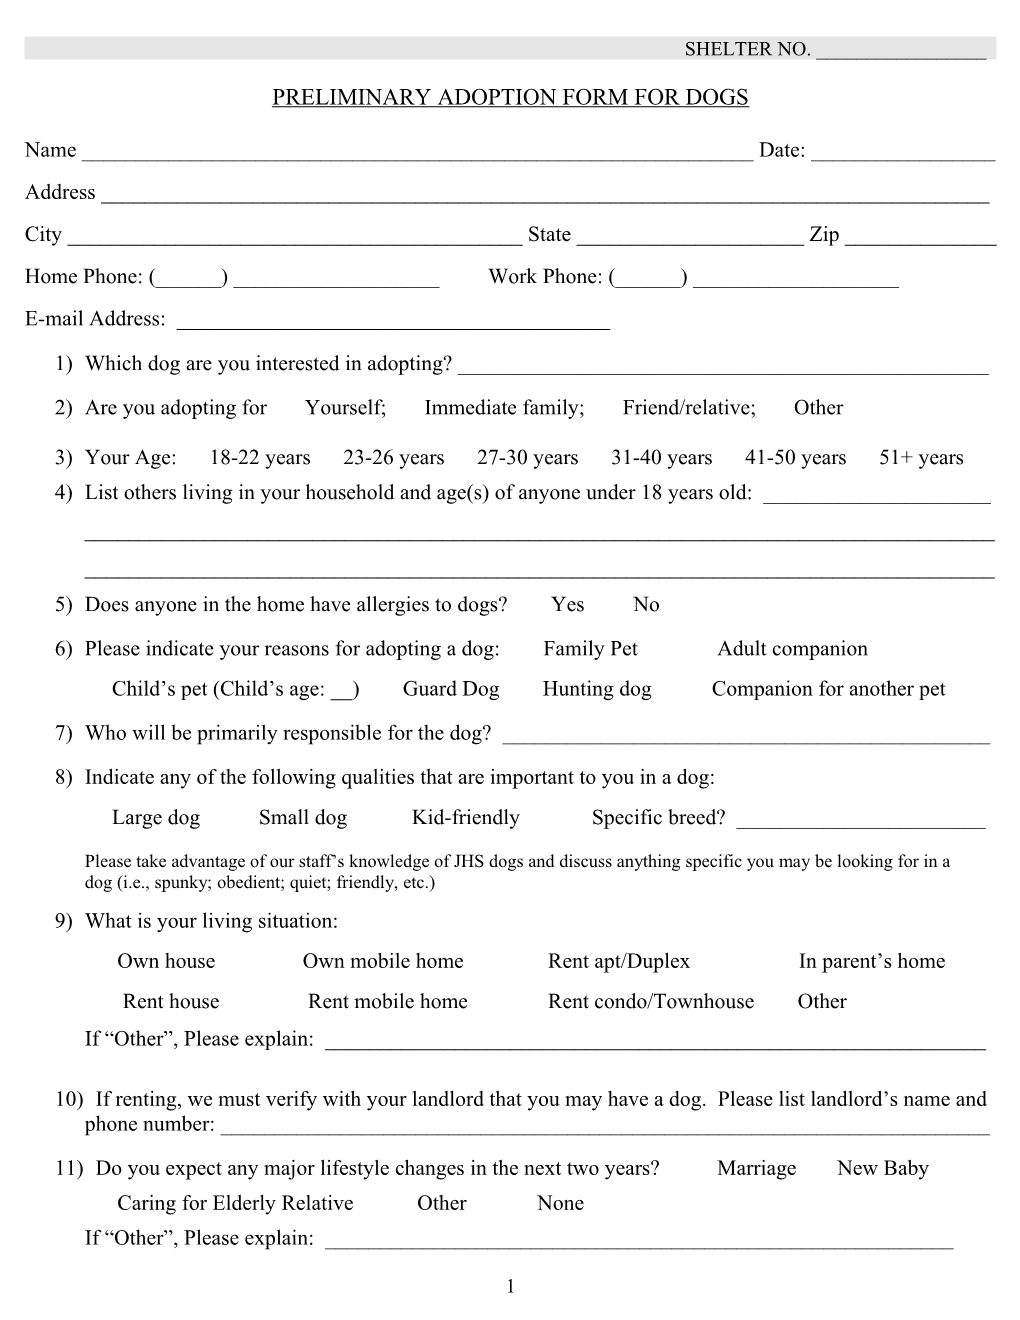 Preliminary Adoption Form for Dogs